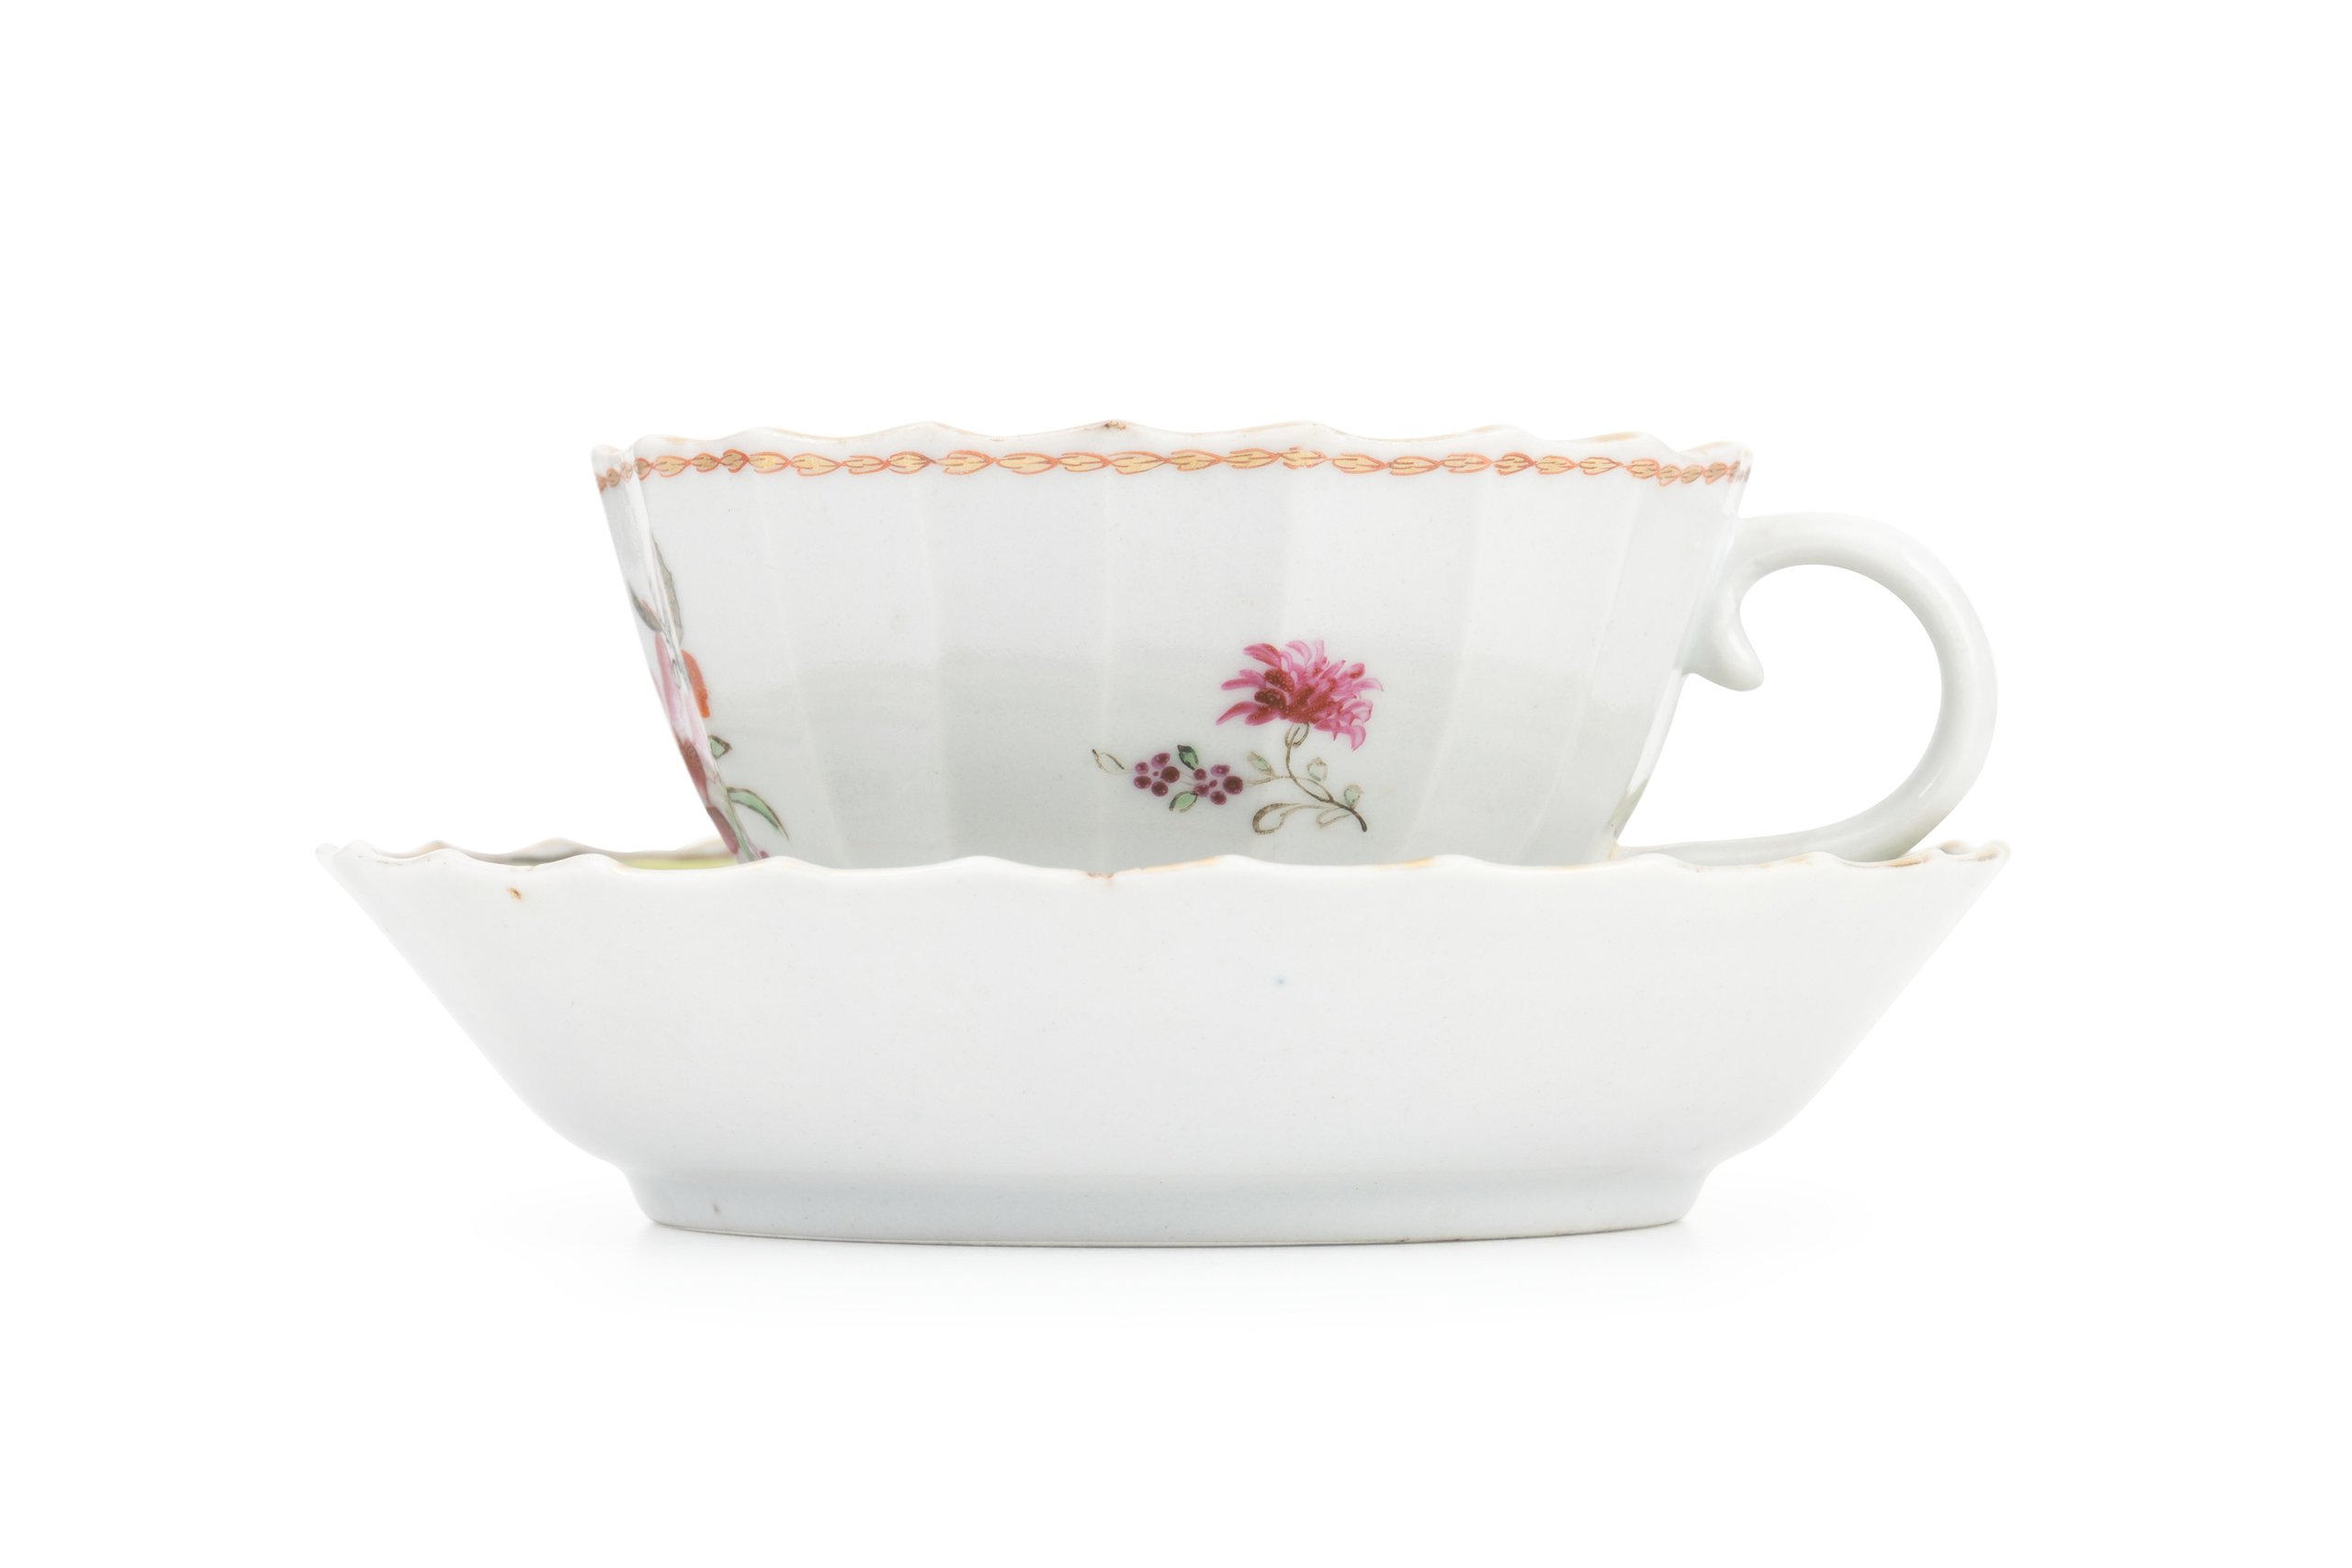 Porcelain teacup and saucer made in China